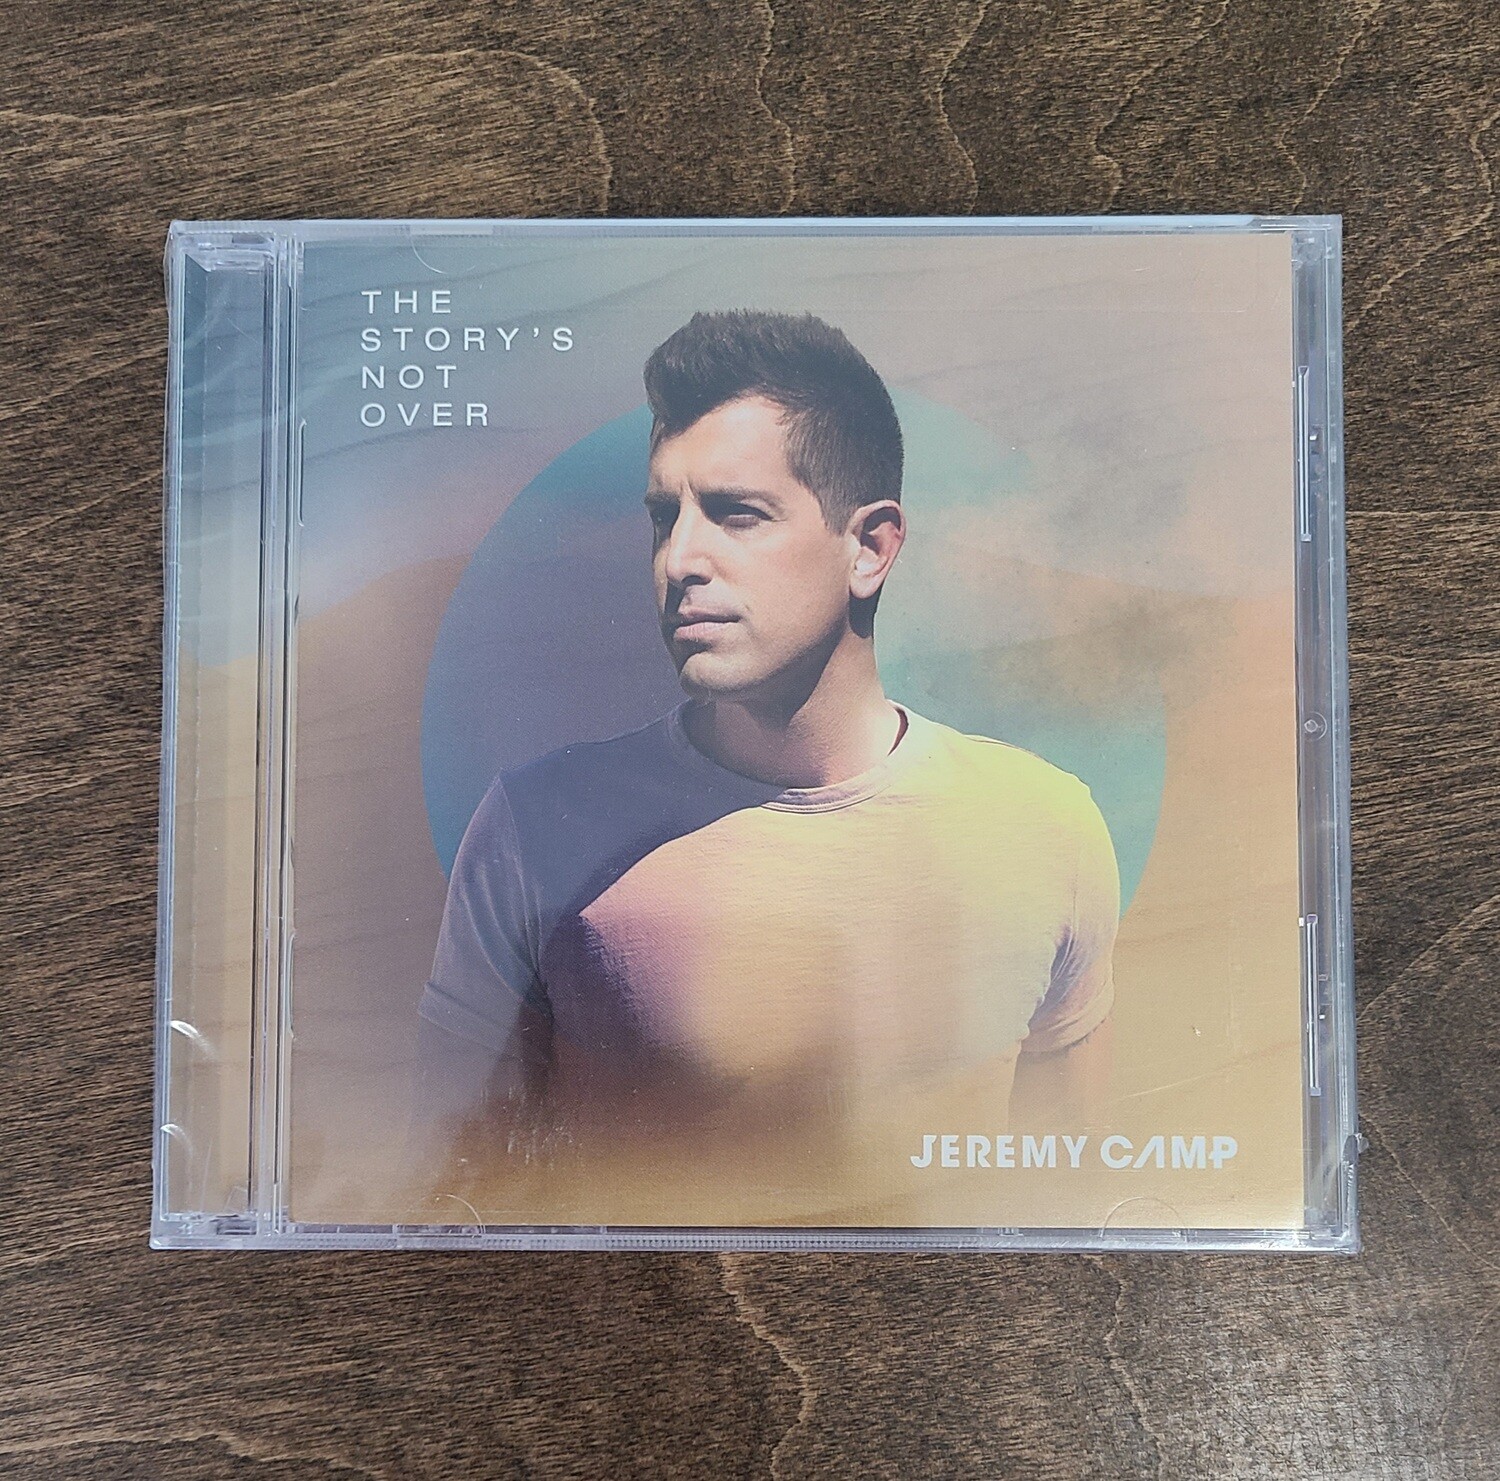 The Story's Not Over by Jeremy Camp CD